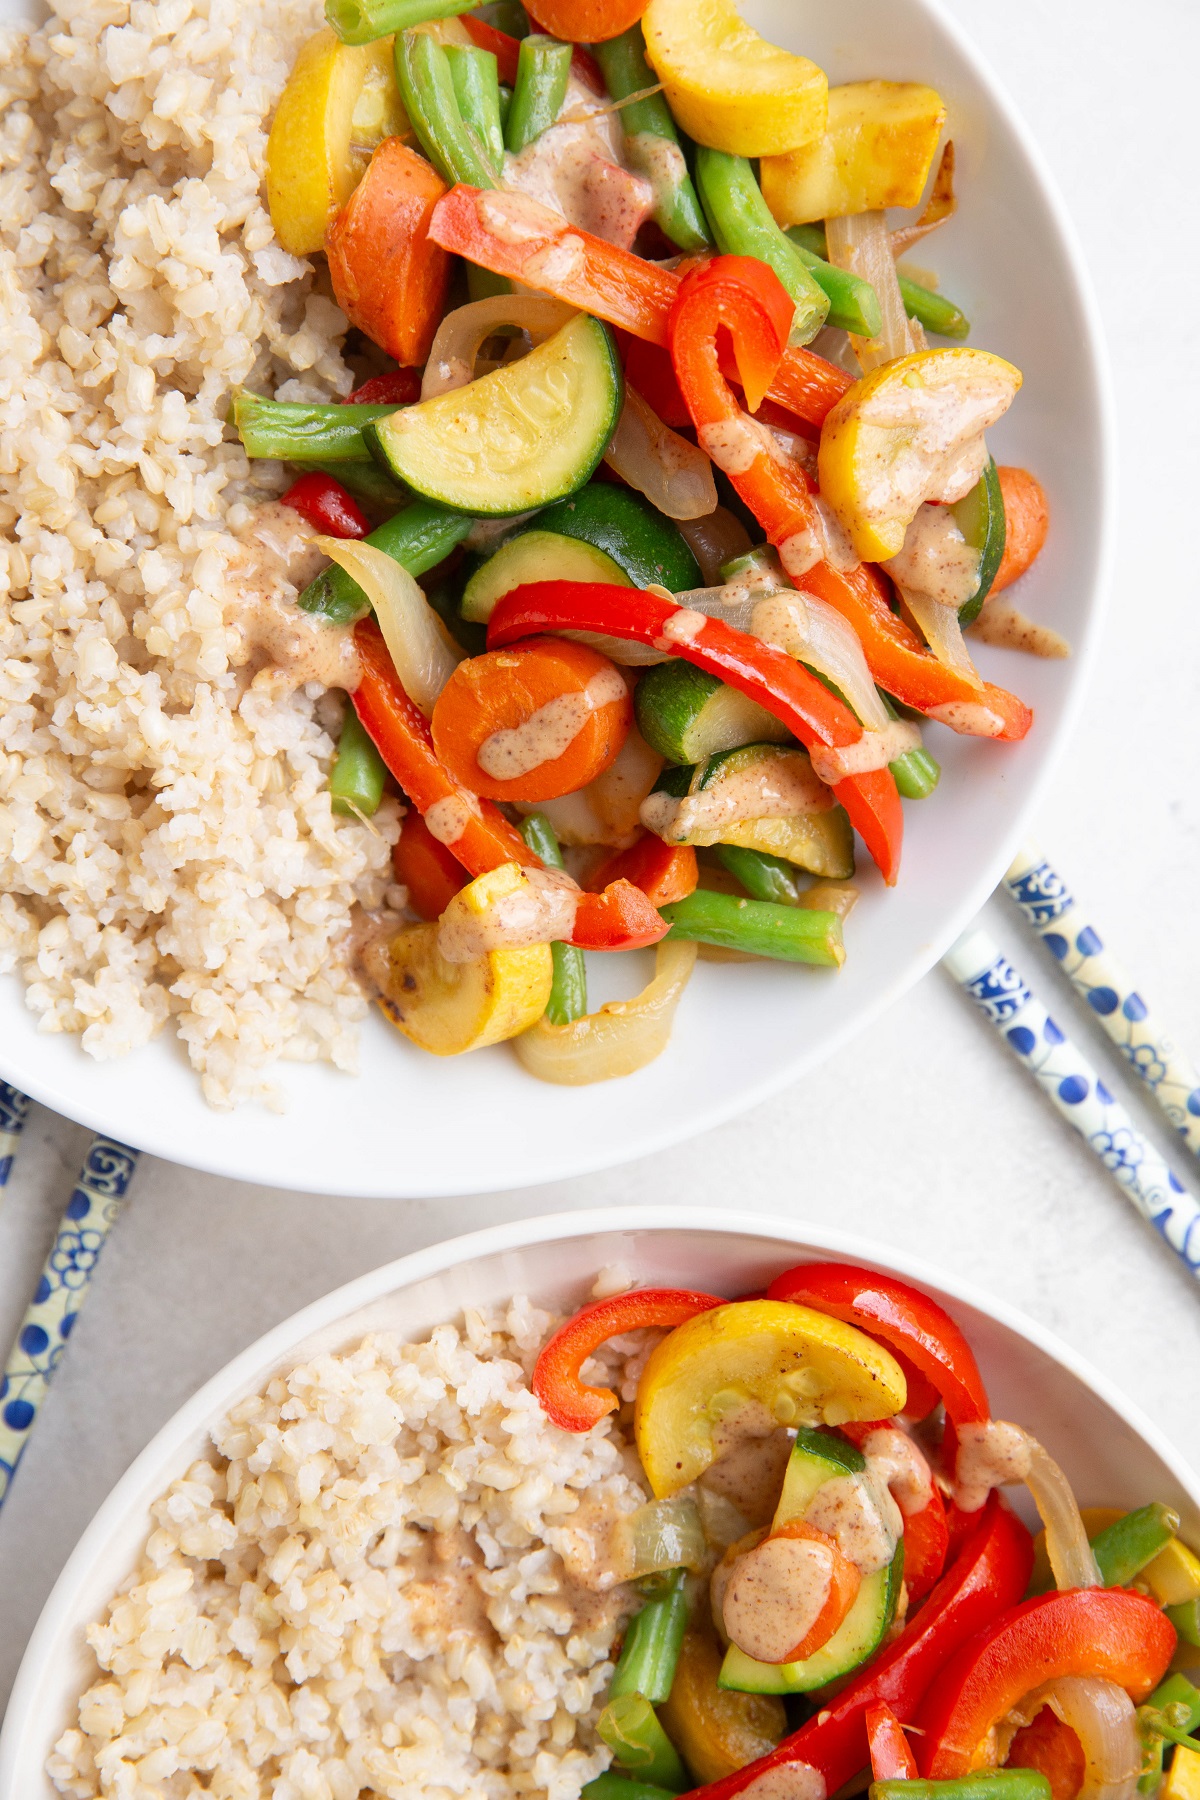 Two white bowls of brown rice and vegetable stir fry.